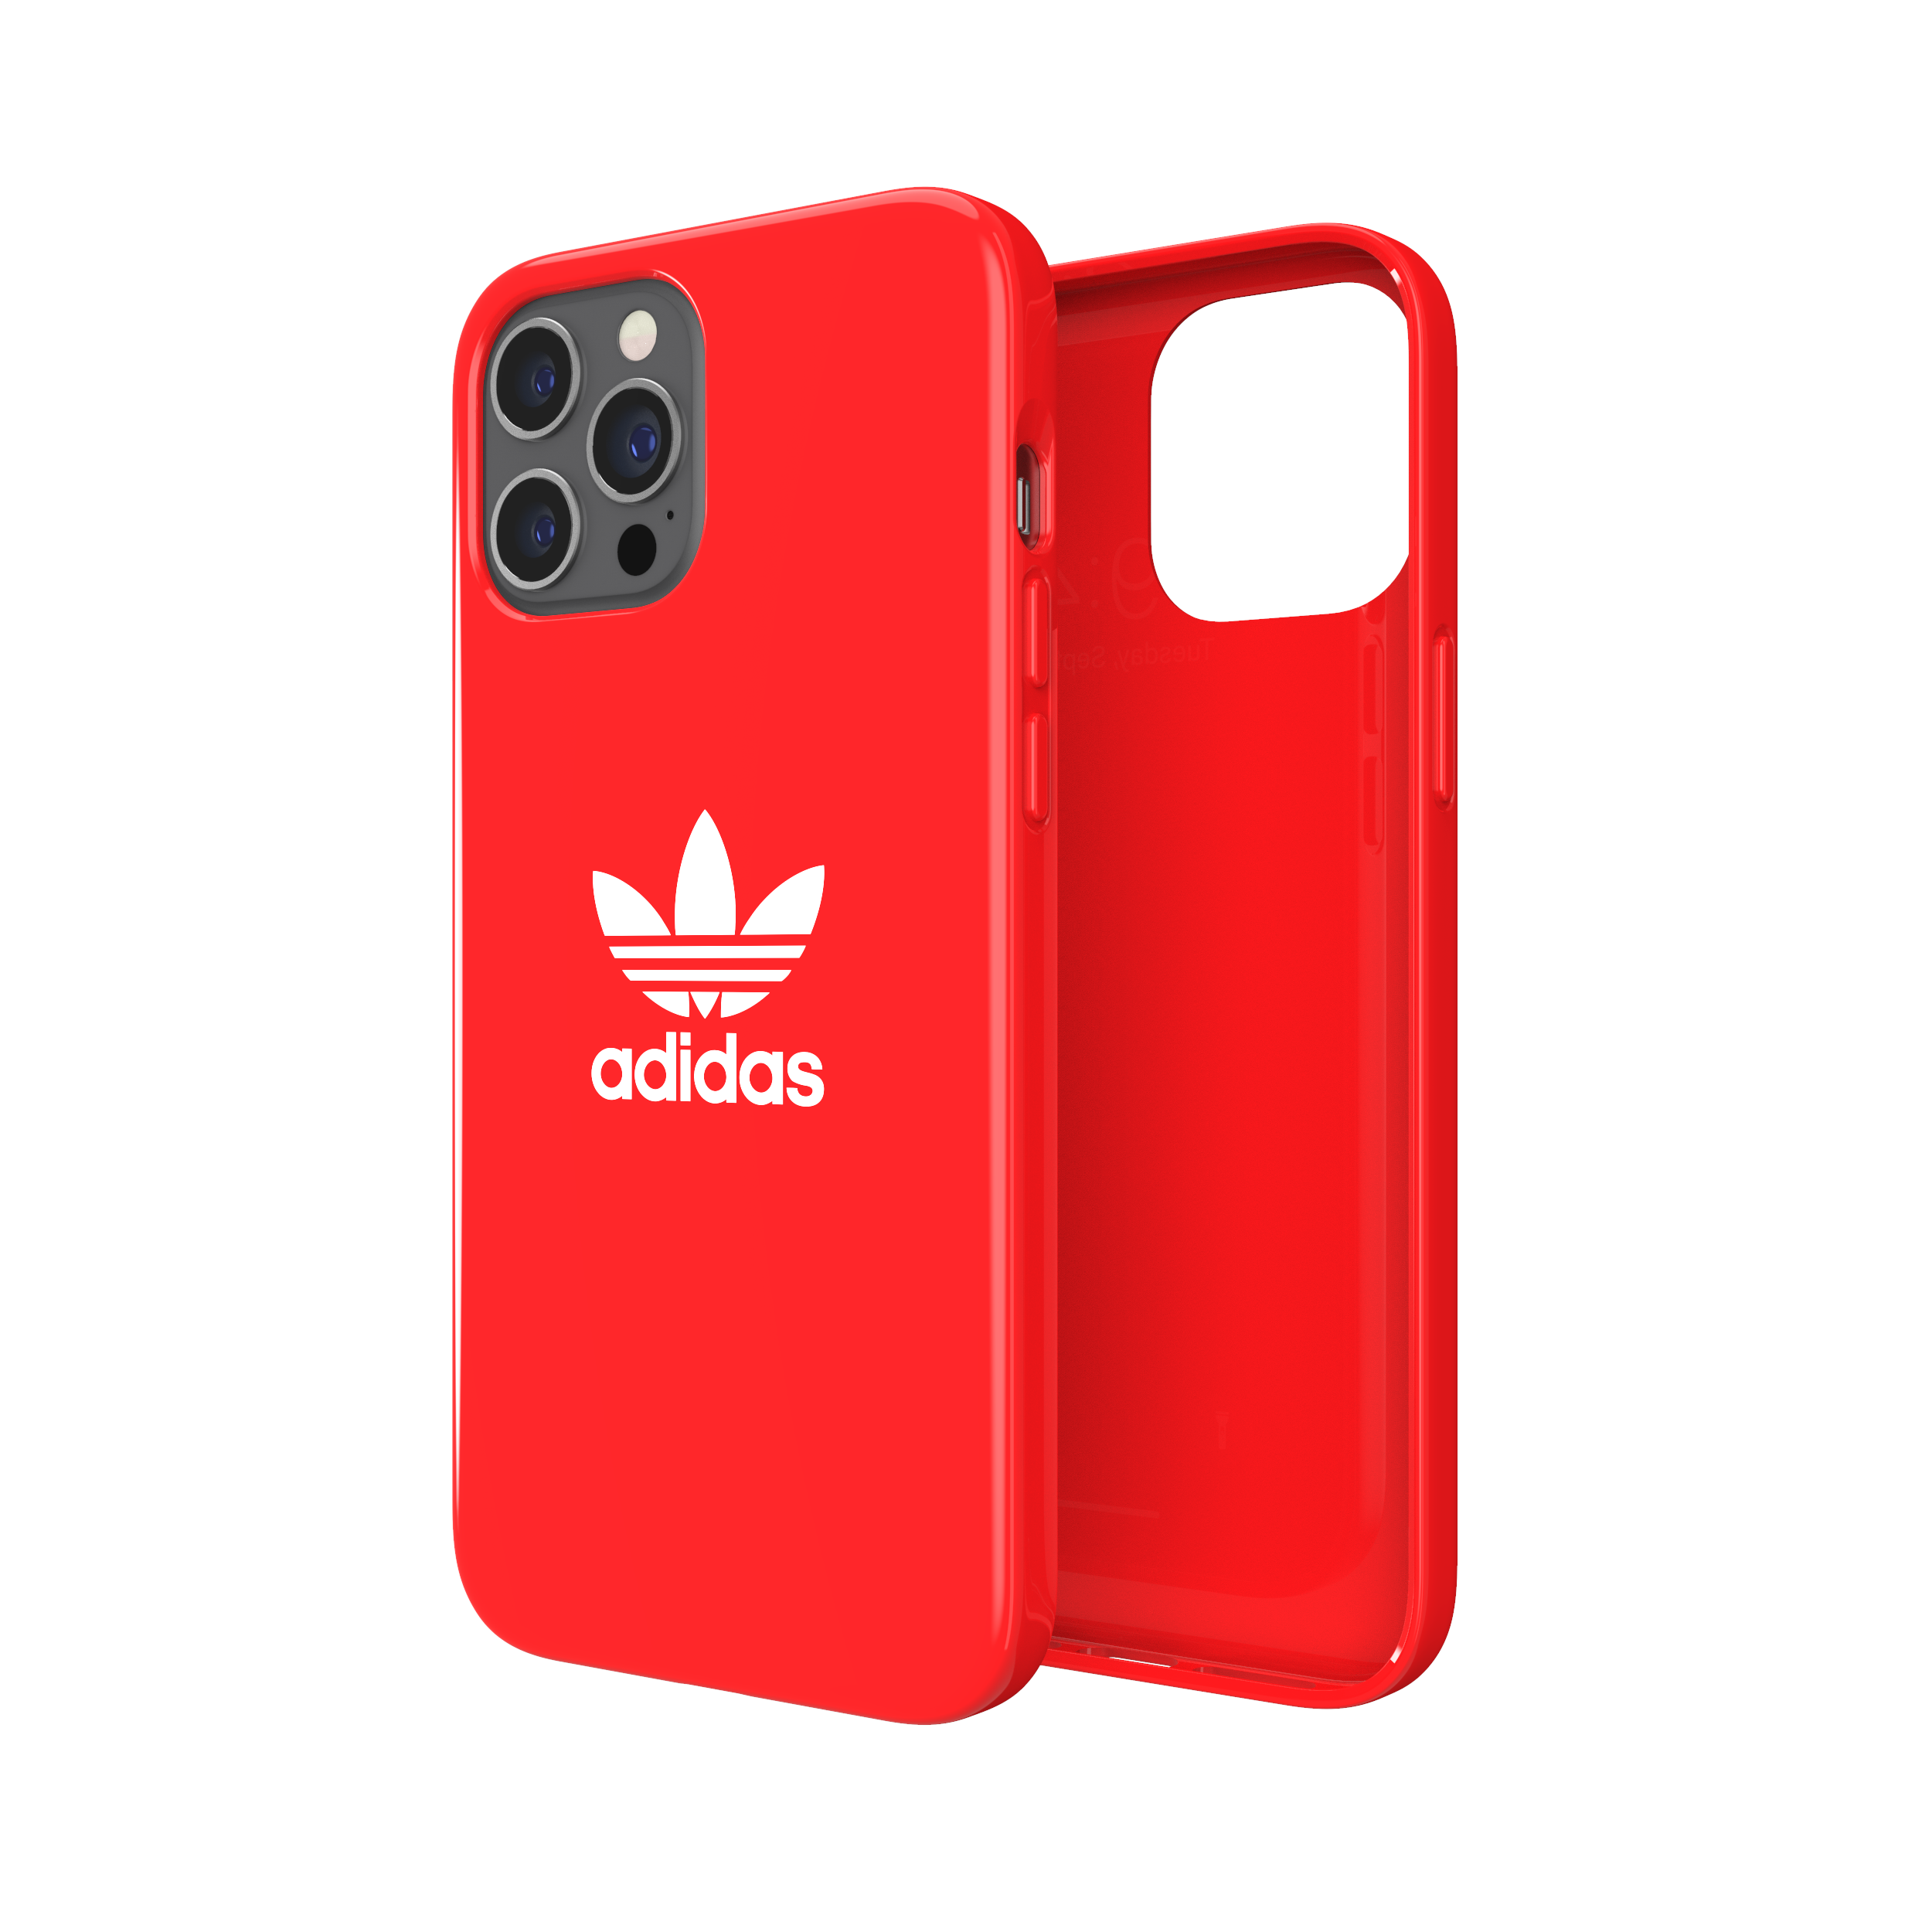 adidas SNAP Apple iPhone 12 Pro Max Trefoil Case - Back cover w/ Trefoil Design, Scratch & Drop Protection w/ TPU Bumper, Wireless Charging Compatible - Scarlet